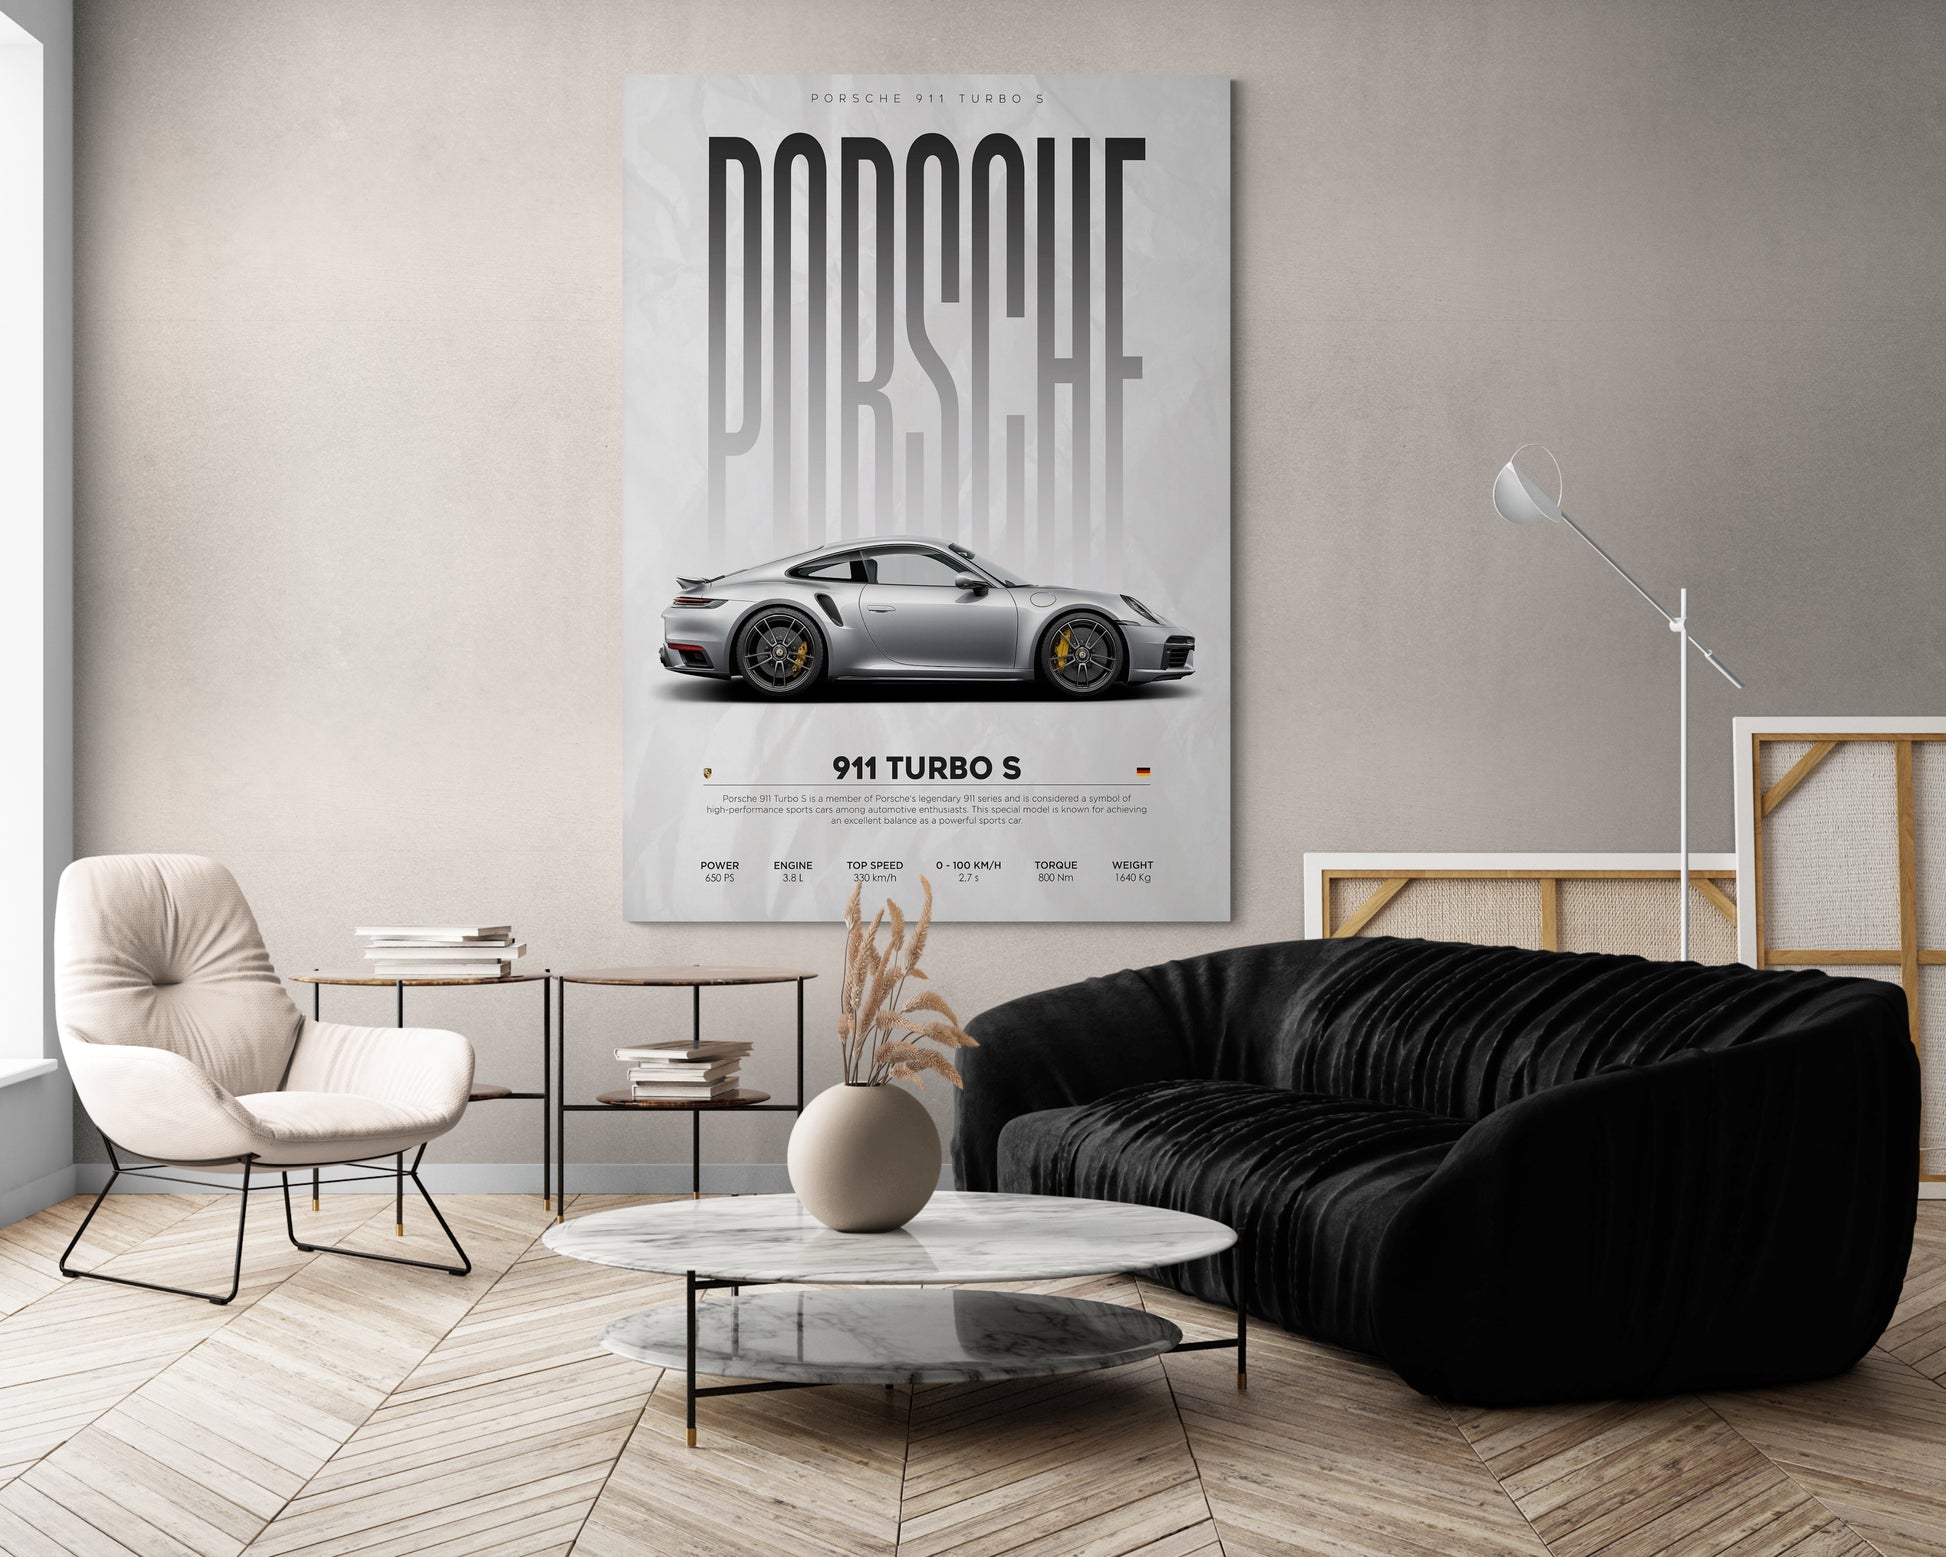  Discover stunning Porsche 911 car images Posters at Essential Walls. Elevate your inside house design with Porsche cars artwork canvases. Explore living room designs with Porsche car canvases, perfect for car enthusiasts.